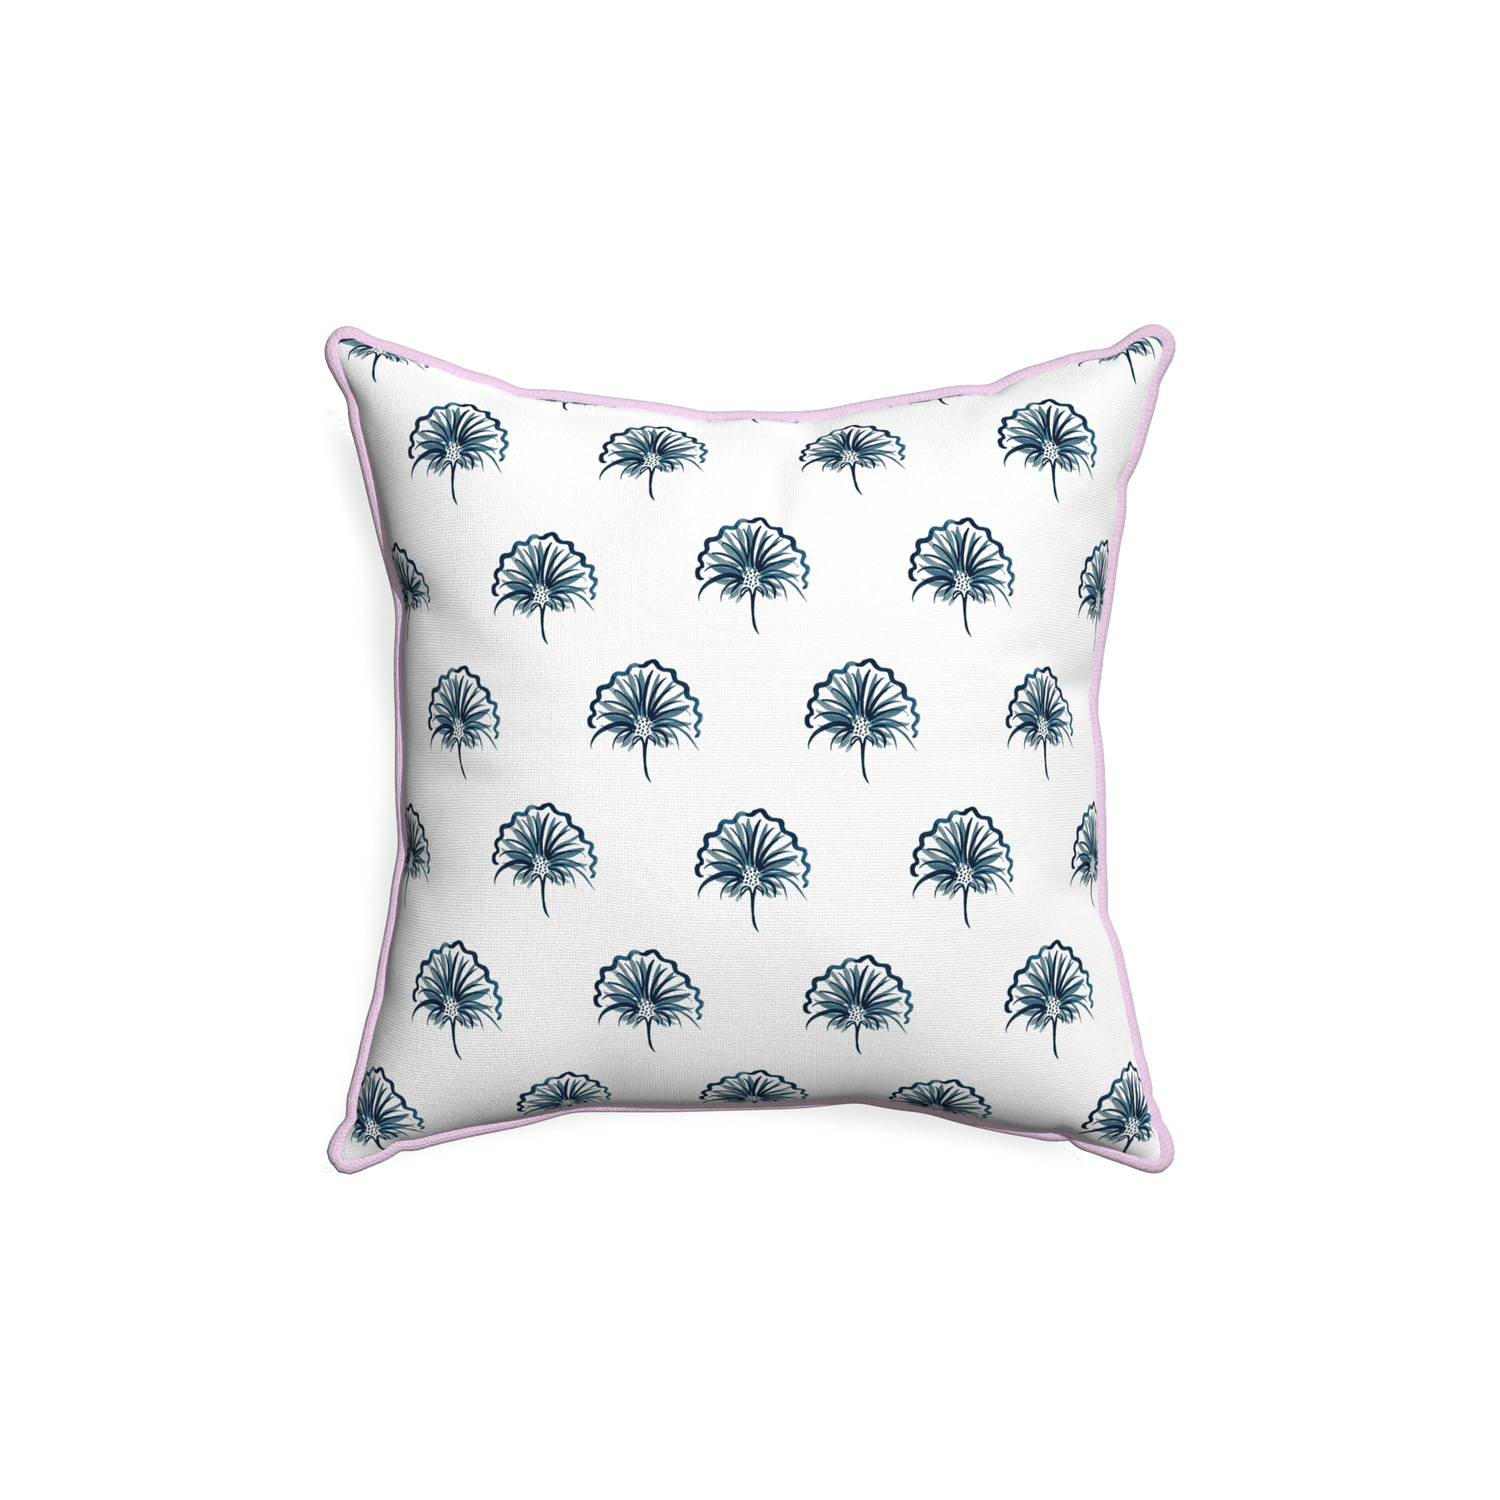 18-square penelope midnight custom pillow with l piping on white background